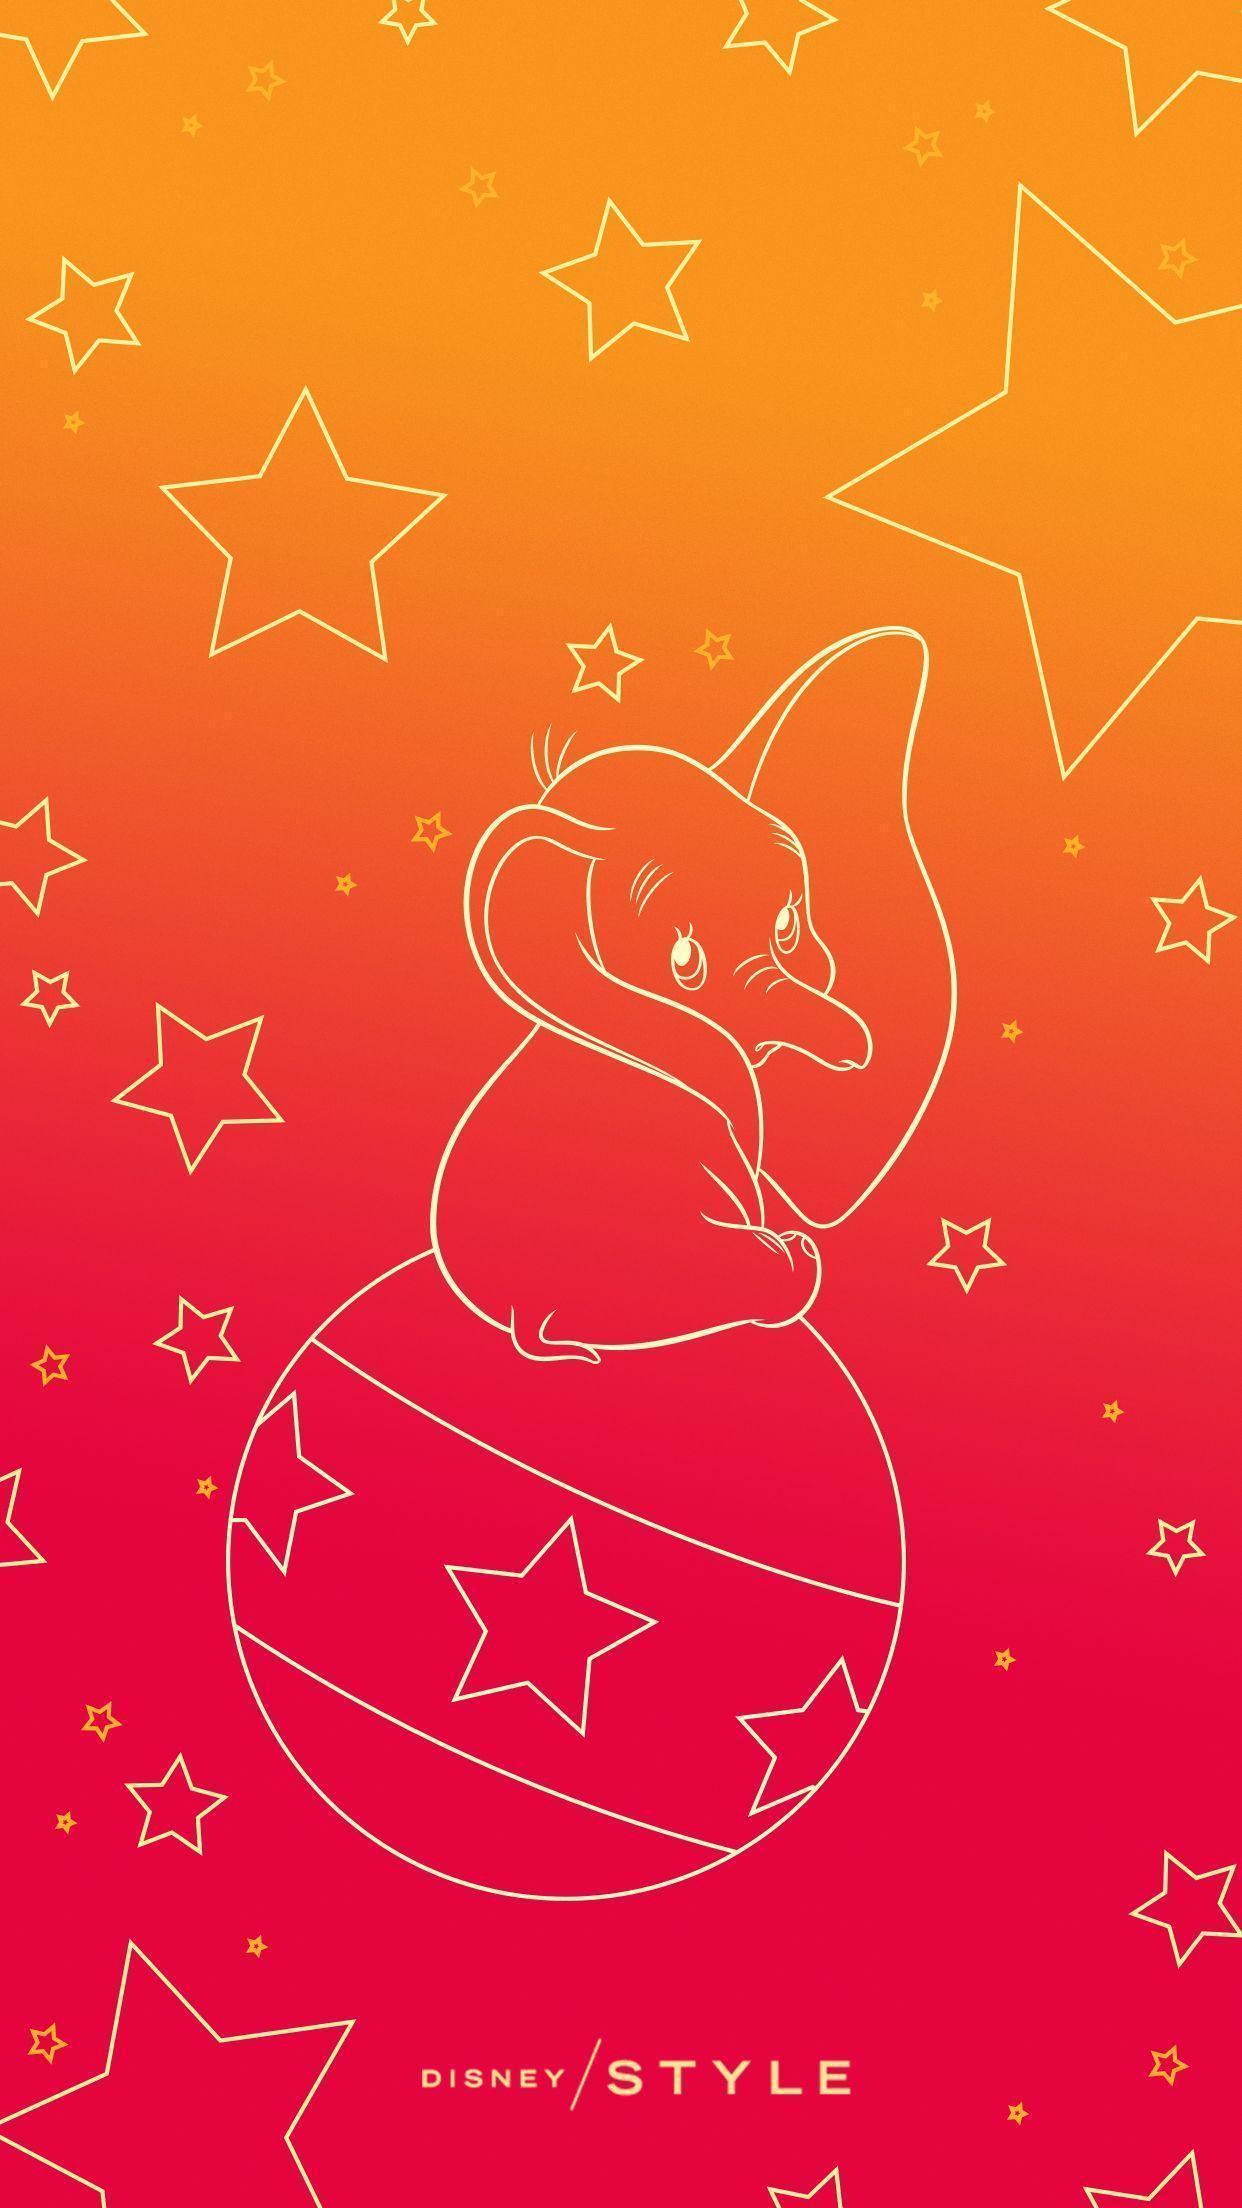 Download These Disney Animal Wallpaper For Your Phone